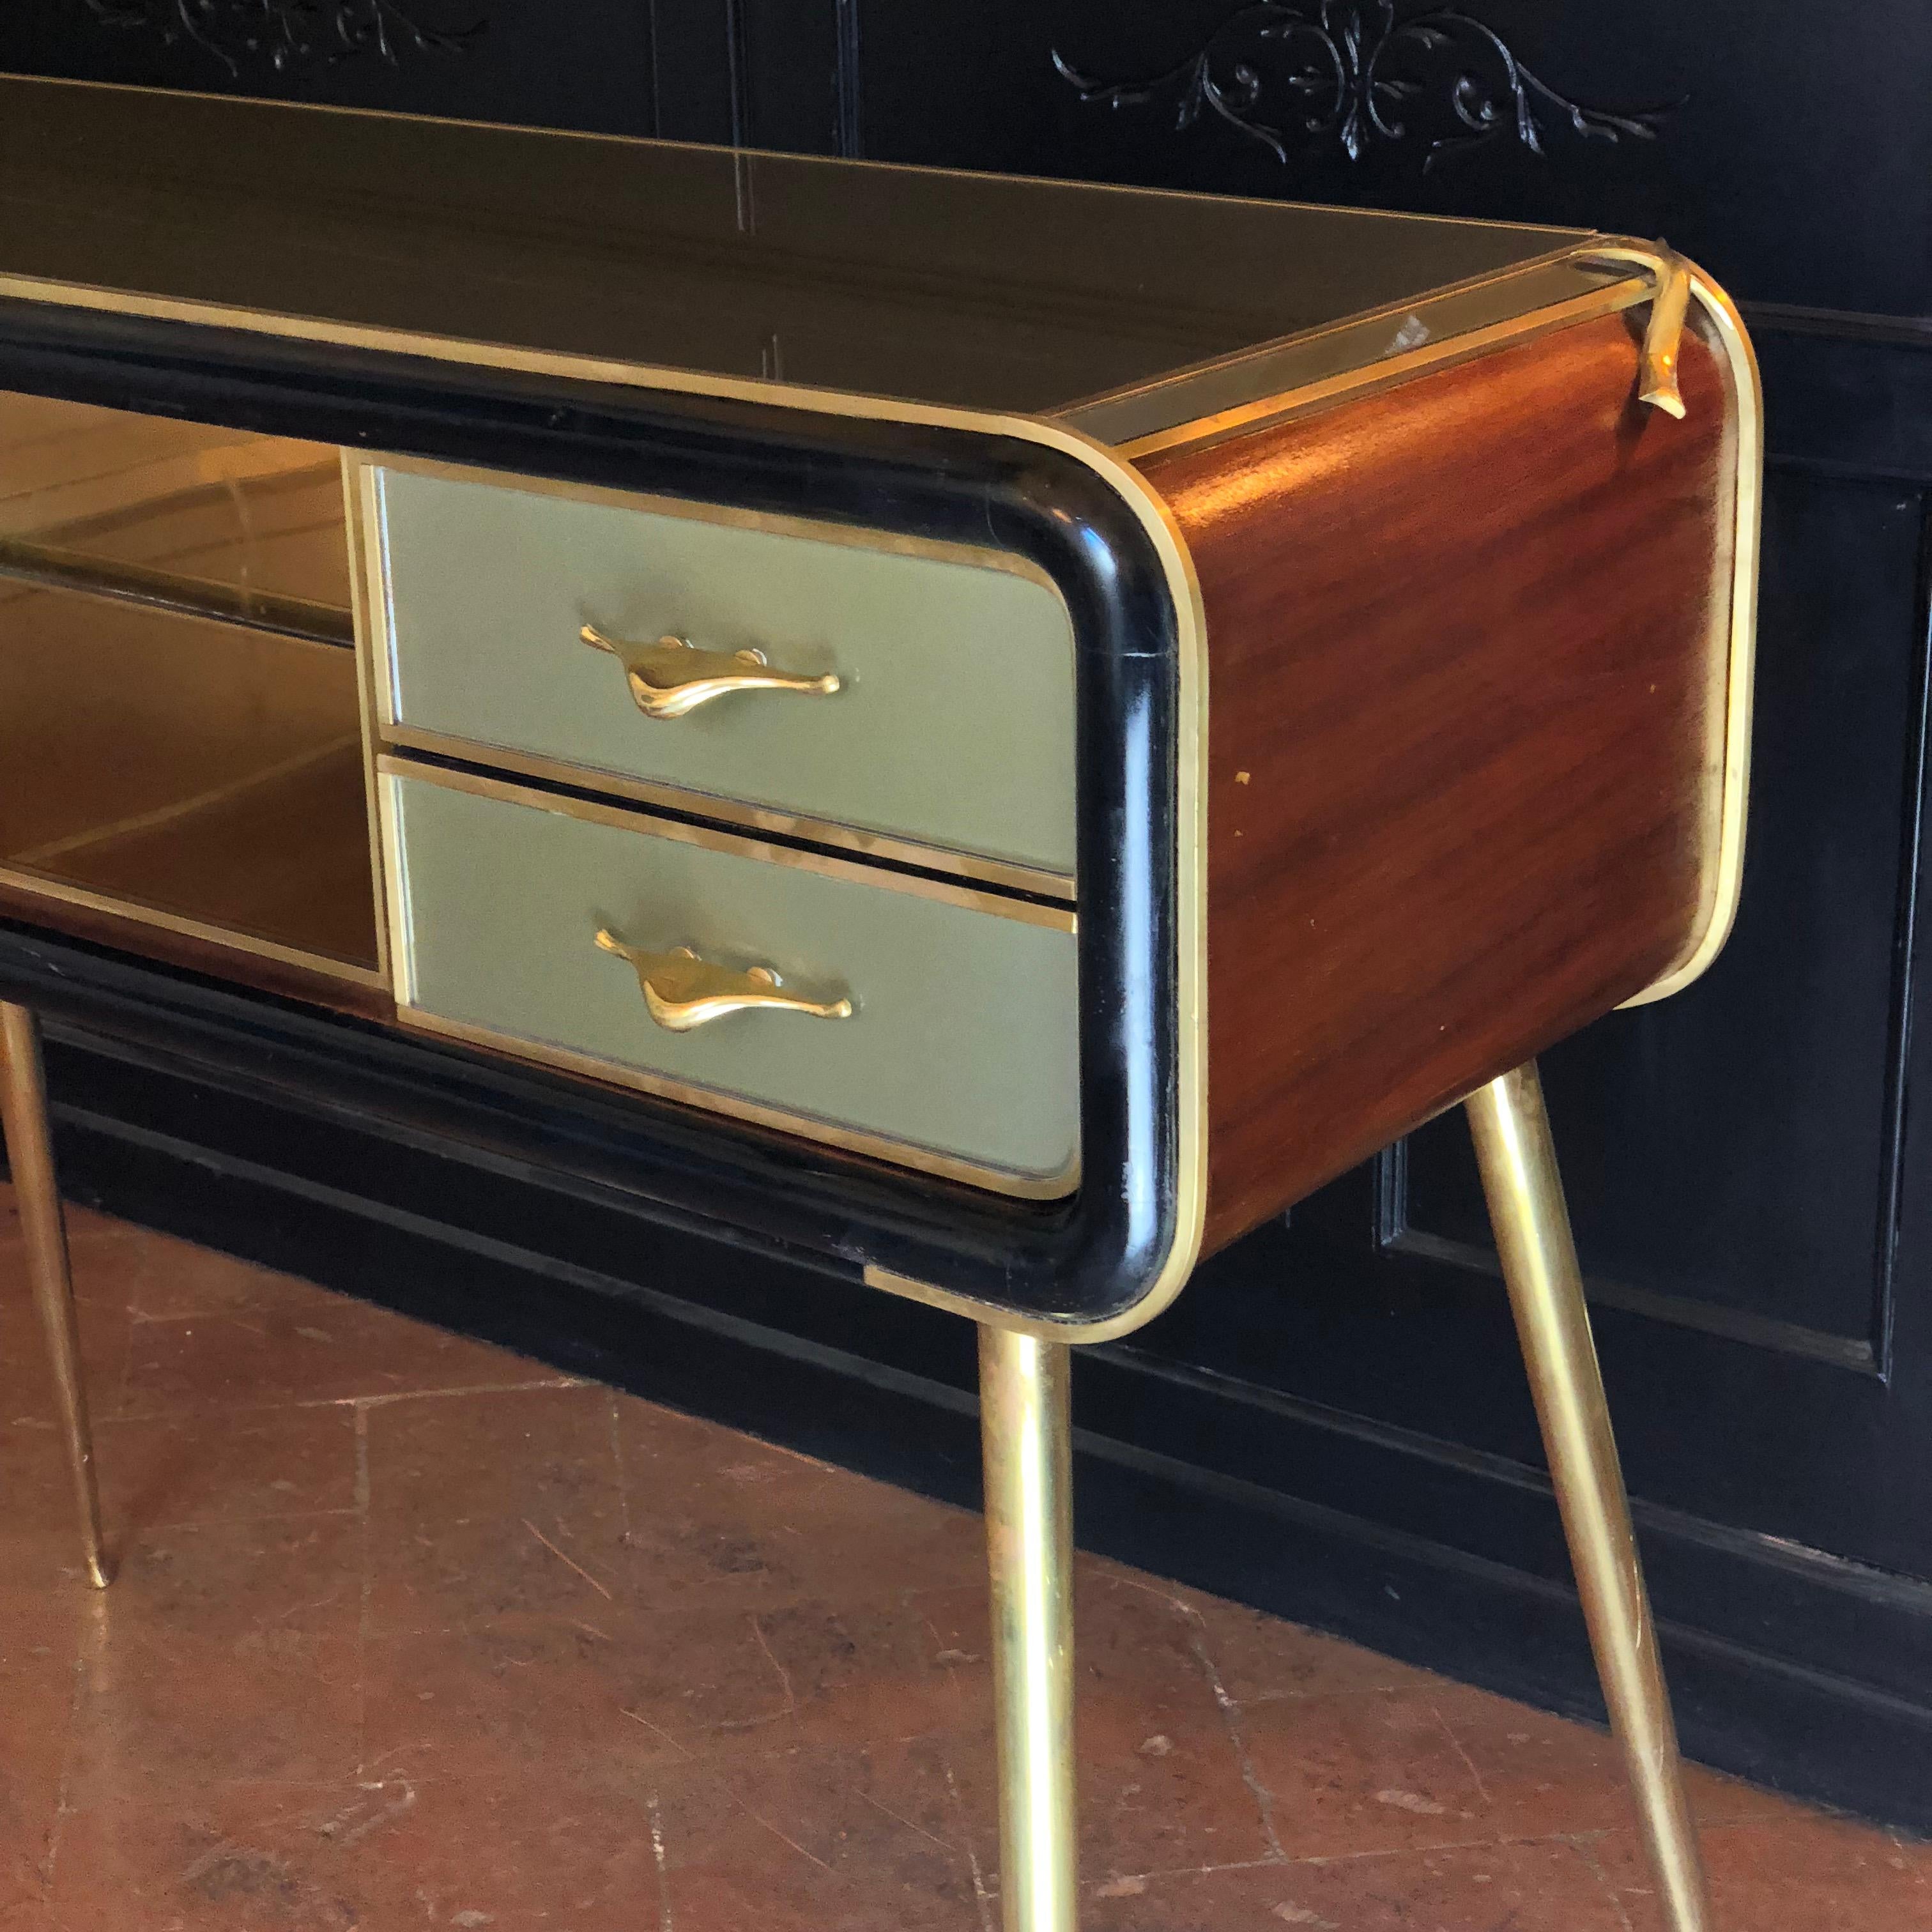 Italian Mid-Century Modern Mahogany Wood, Green Glass with Brass Legs & Details Console